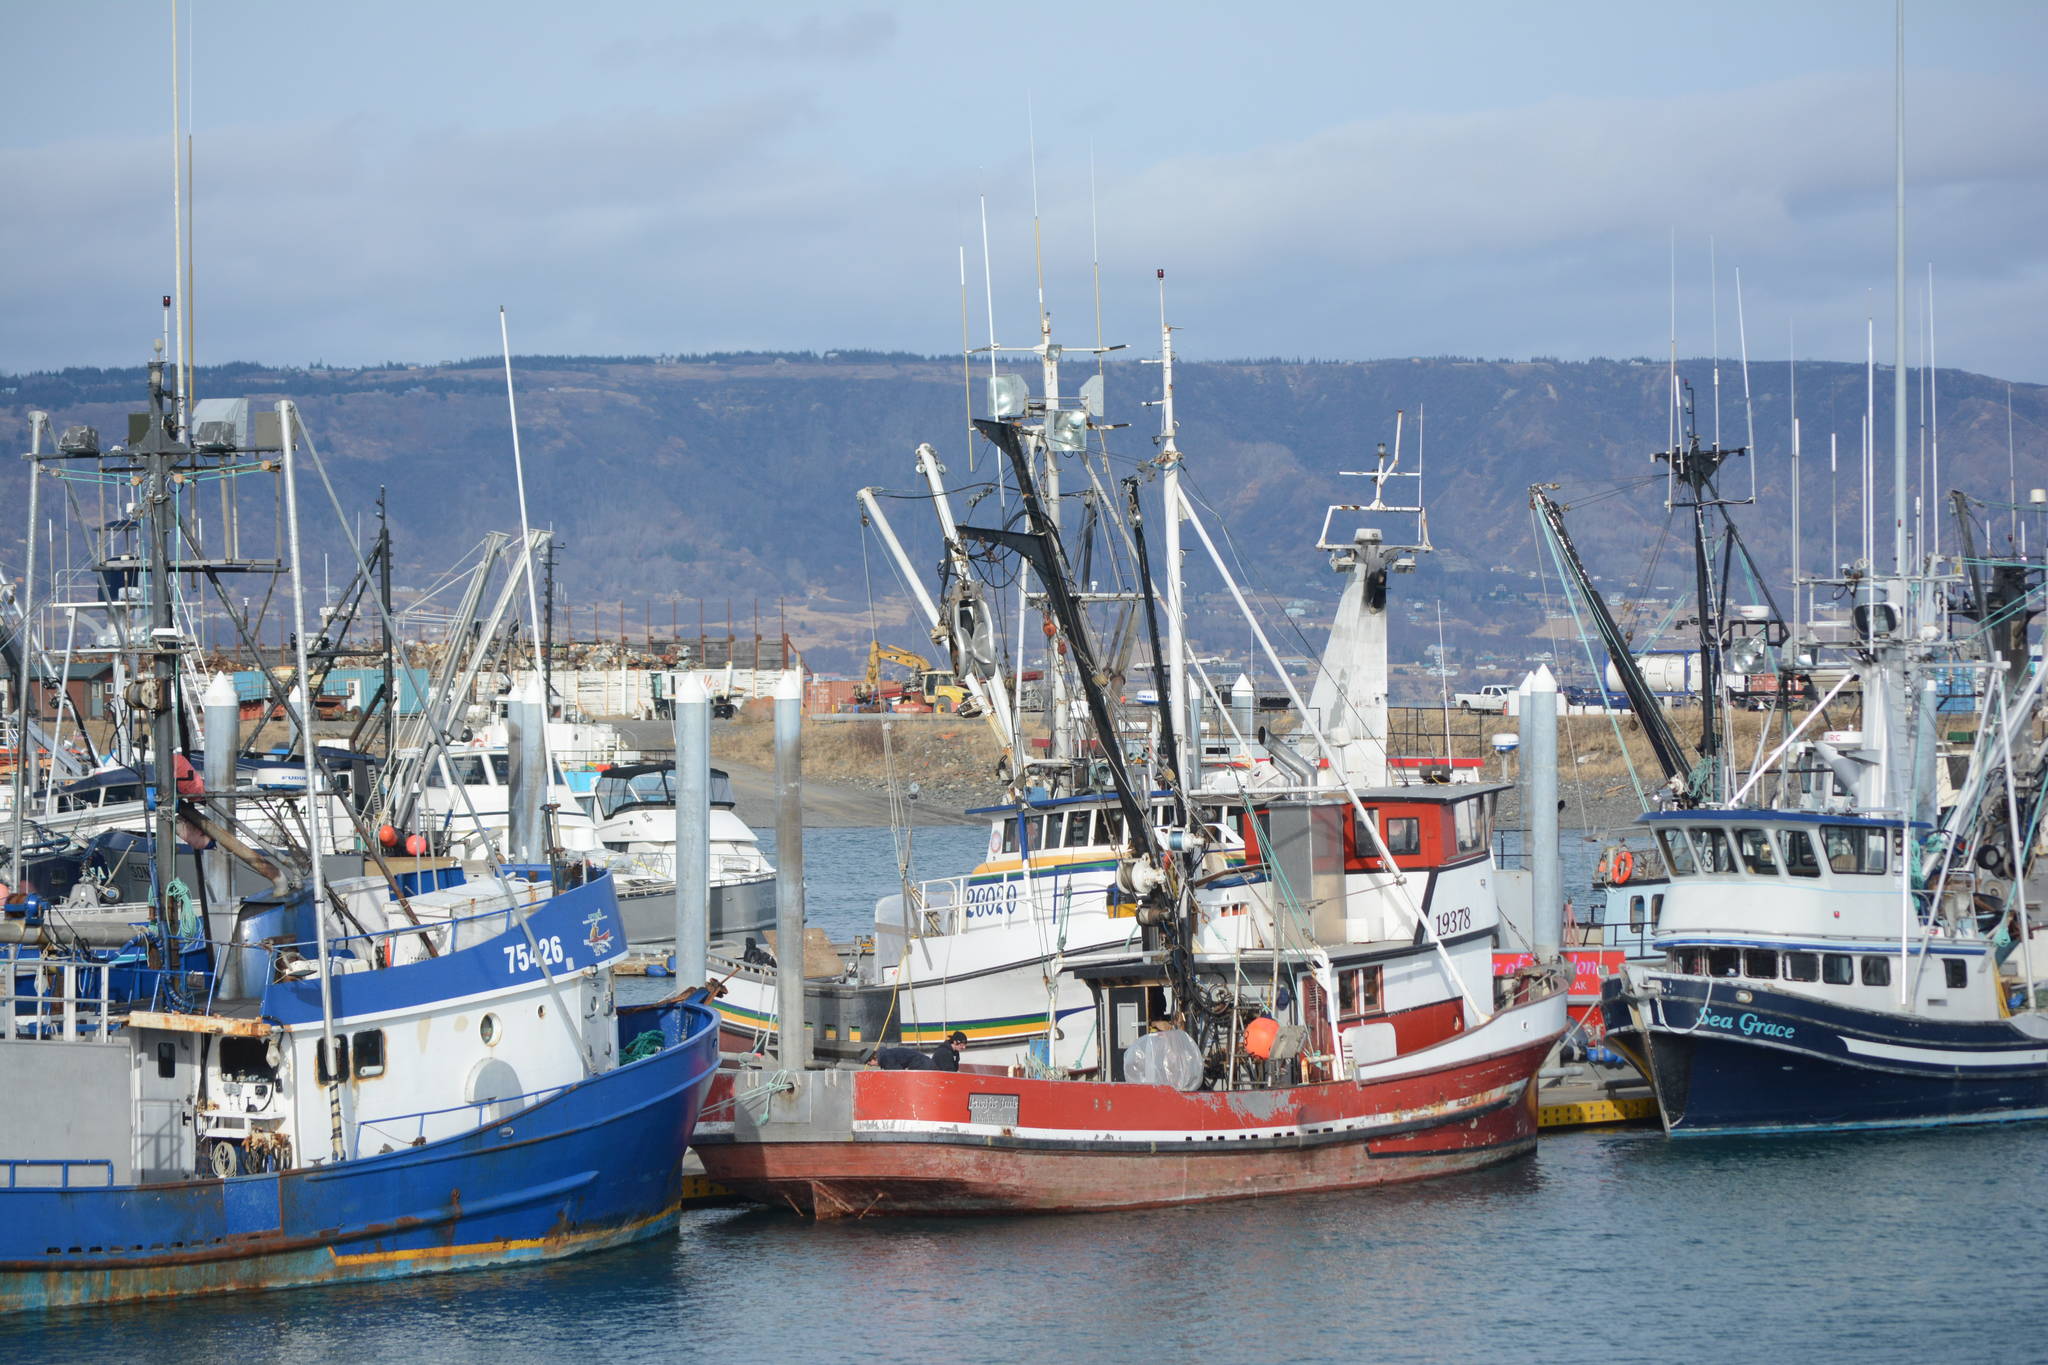 Seawatch: Board of Fisheries meets March 9